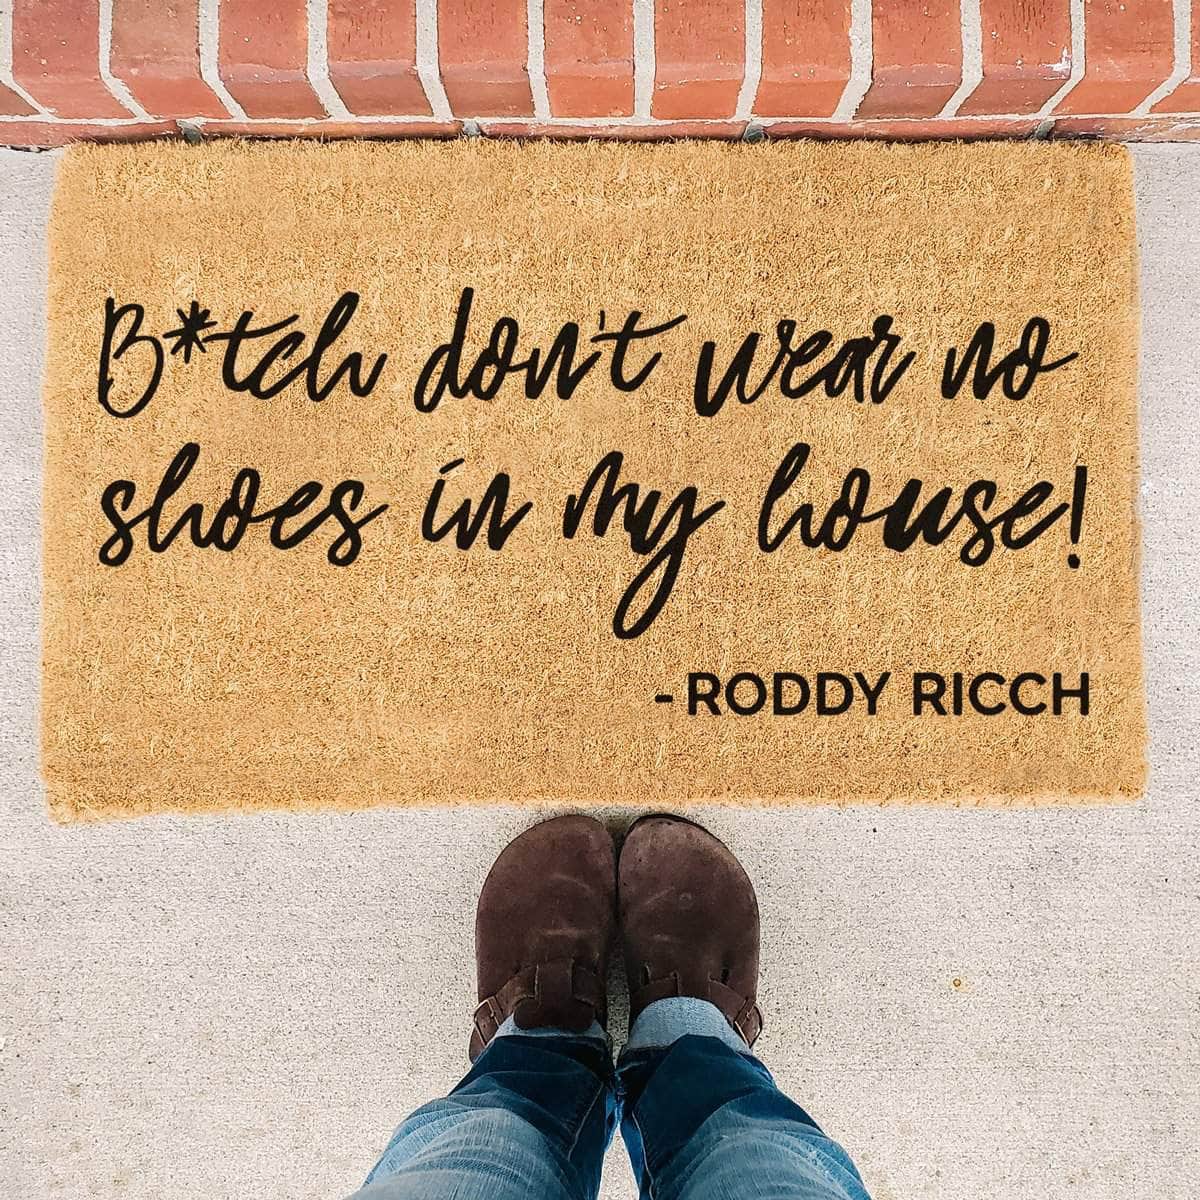 B*tch don't wear no shoes in my house - Roddy Ricch Doormat